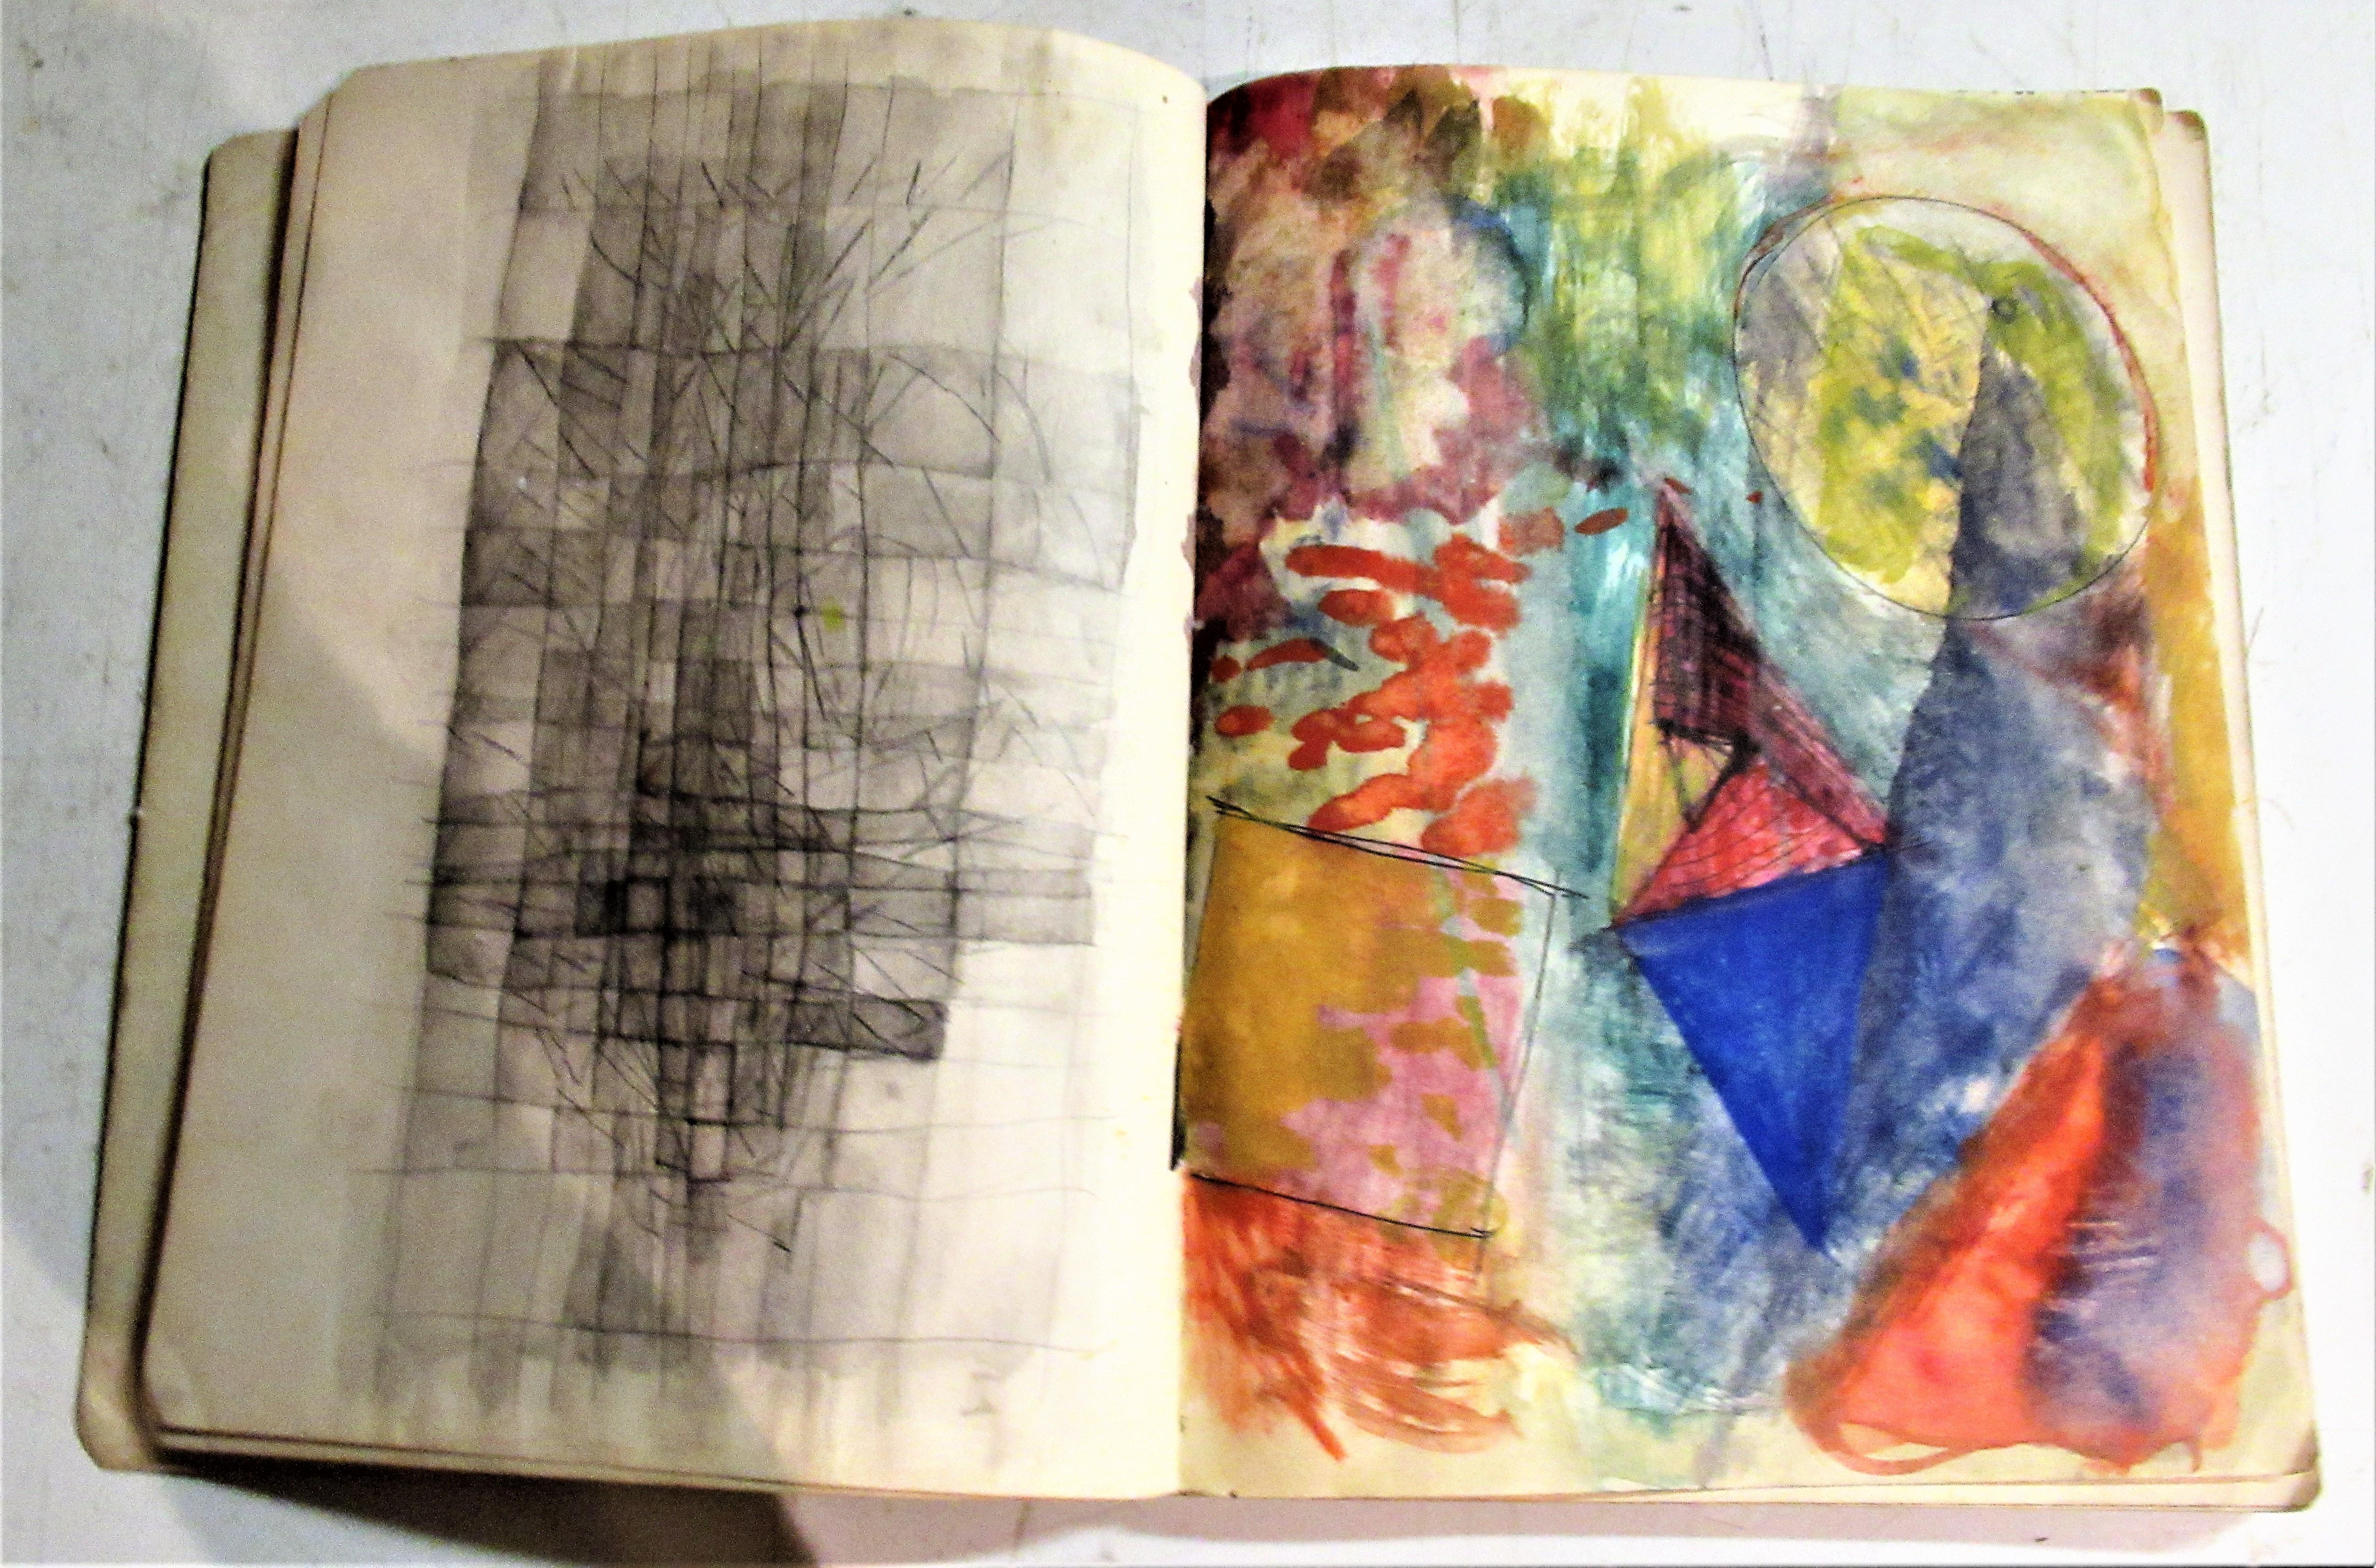 Signed sketchbook of well listed American painter artist Philip Bornarth while studying at the Art Institute of Chicago during fall 1948 - spring 1949. The book contains brilliant abstract surrealist style images landscape gouache paintings, bold